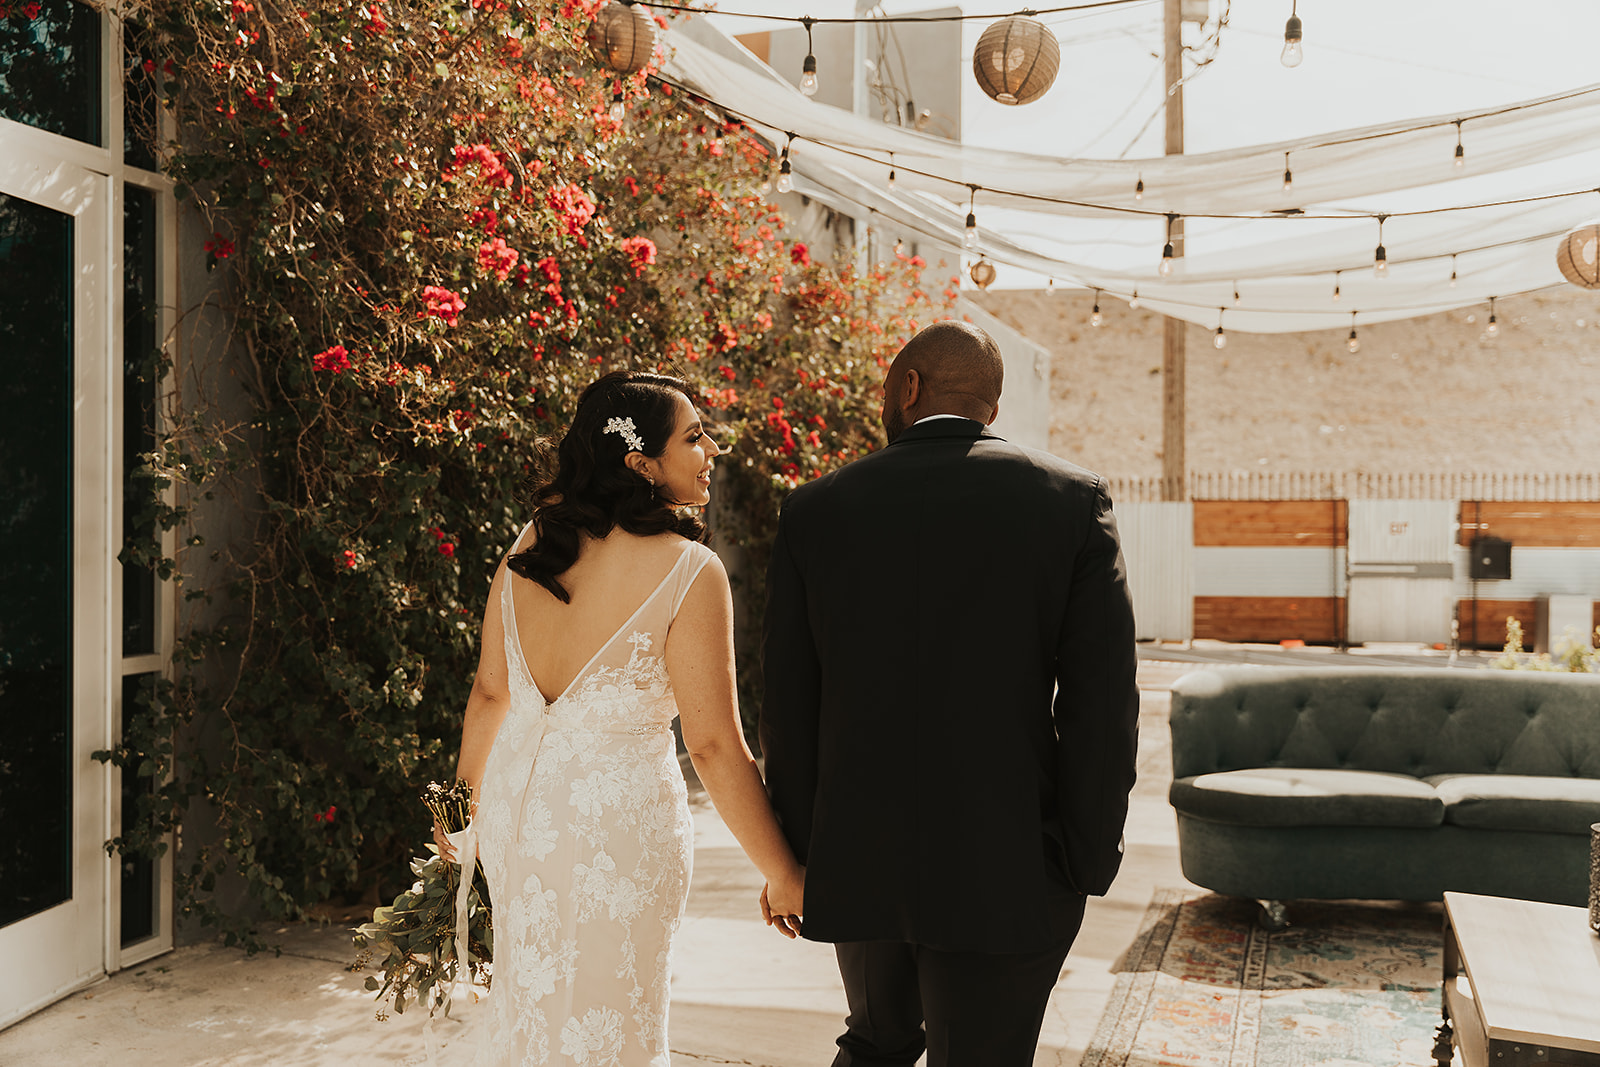 Bride and groom holding hands while walking together at wedding venue in Las Vegas